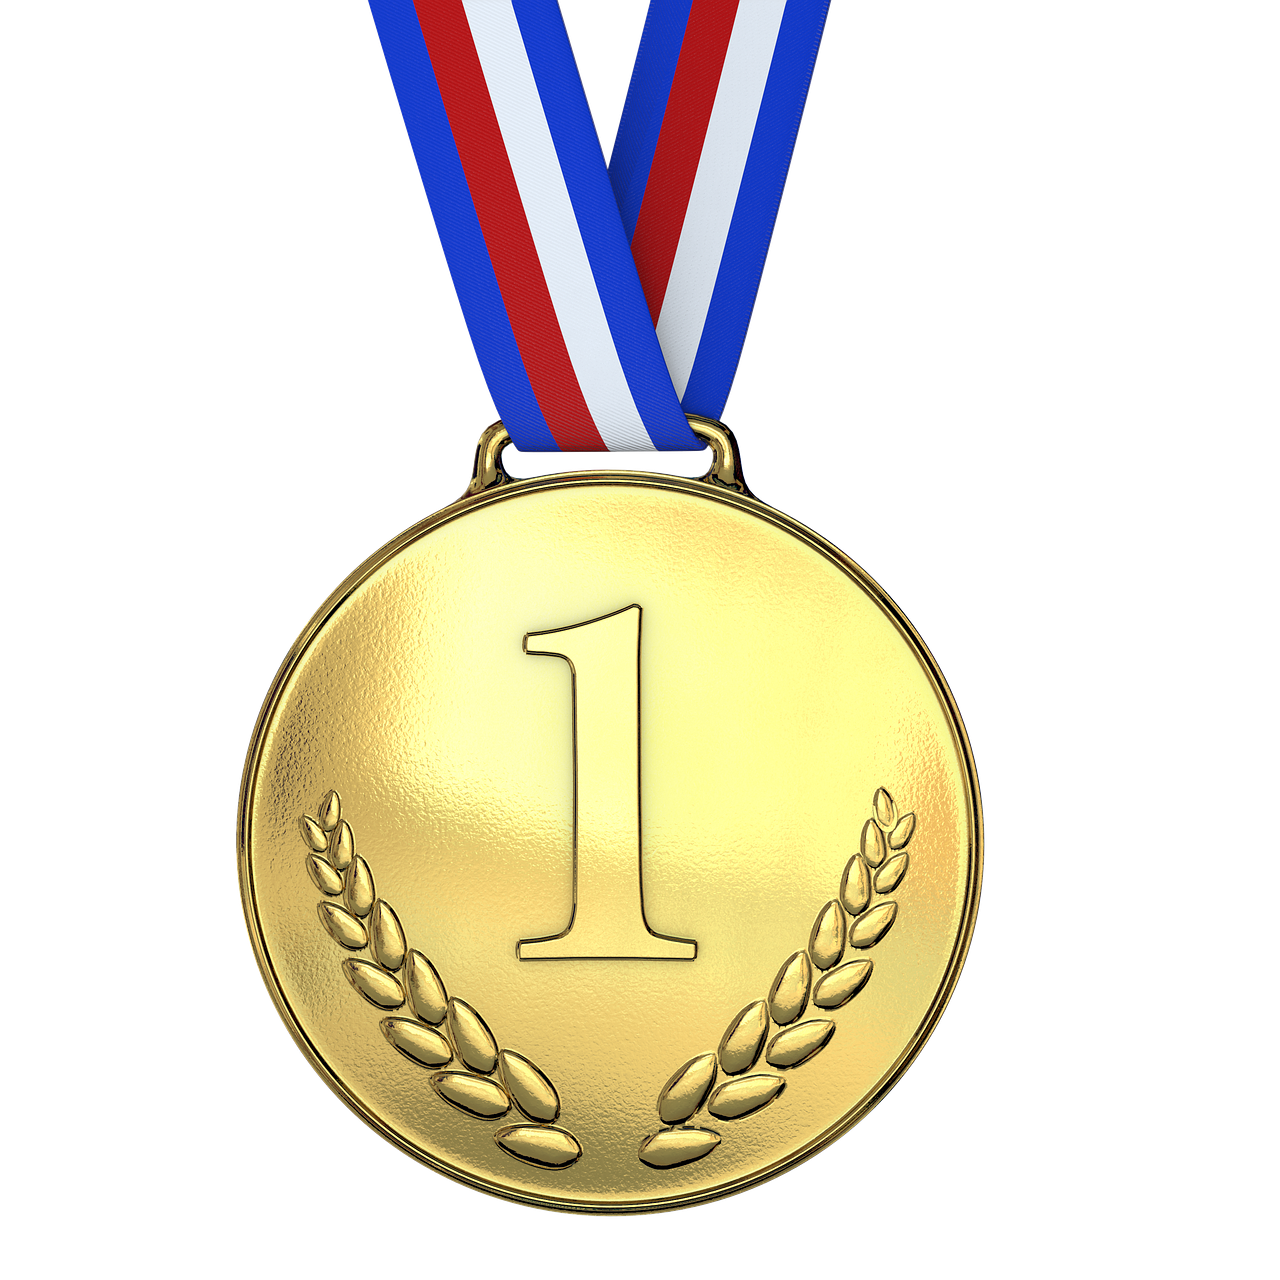 a gold medal with a ribbon around it, a digital rendering, on black background, full subject shown in photo, outstanding detail, beginner